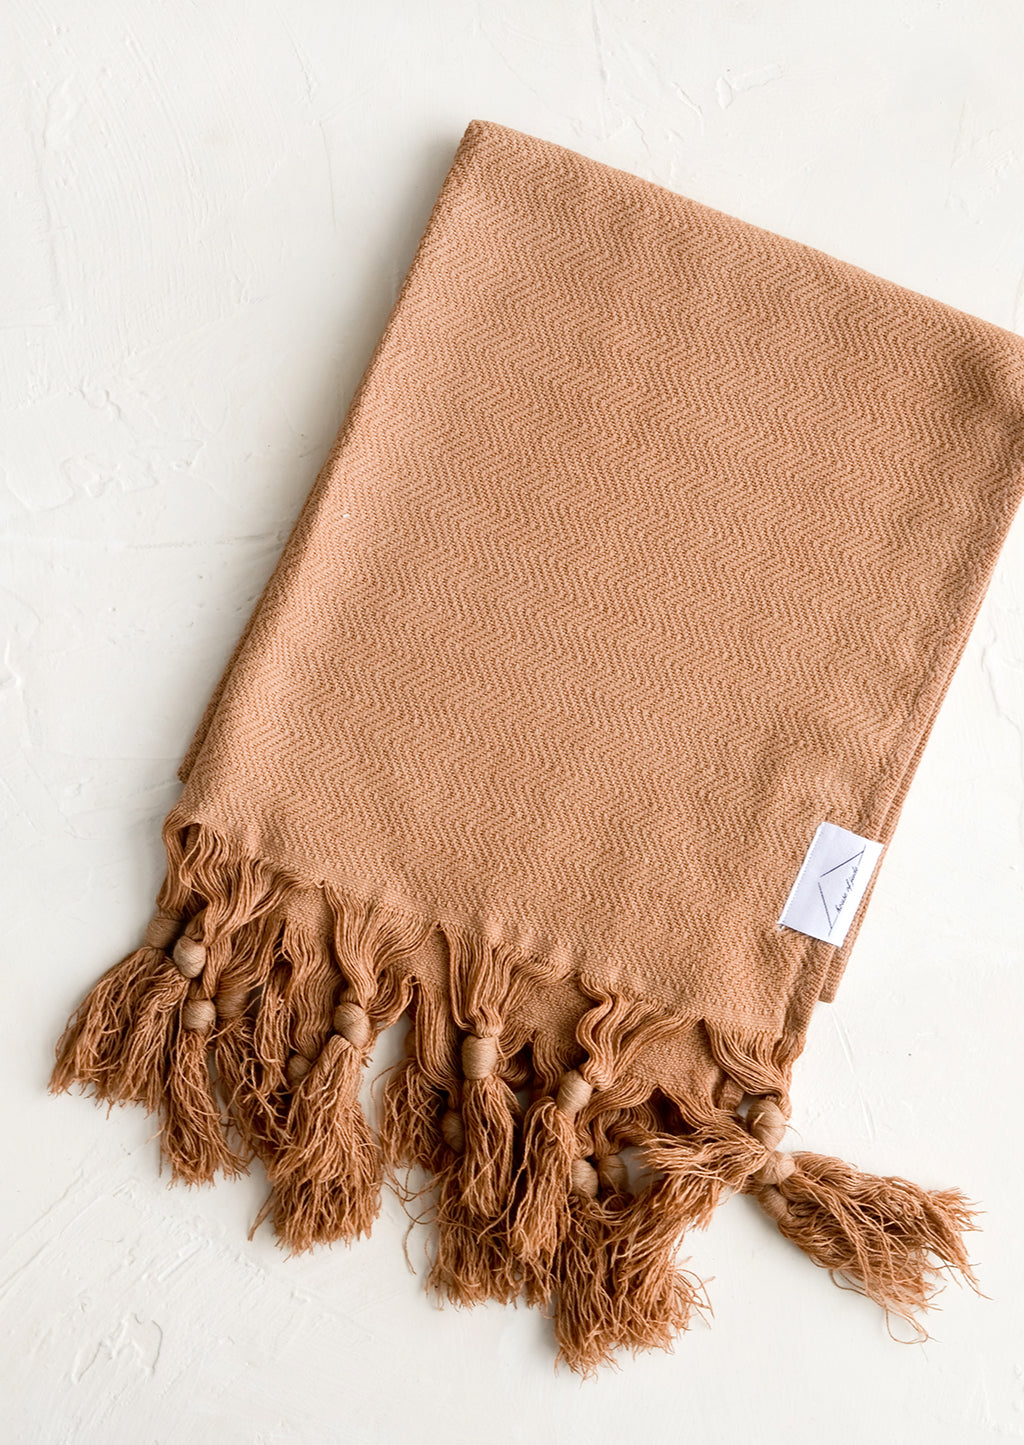 Milk Chocolate: A turkish hand towel in chocolate brown with tonal fringed trim.